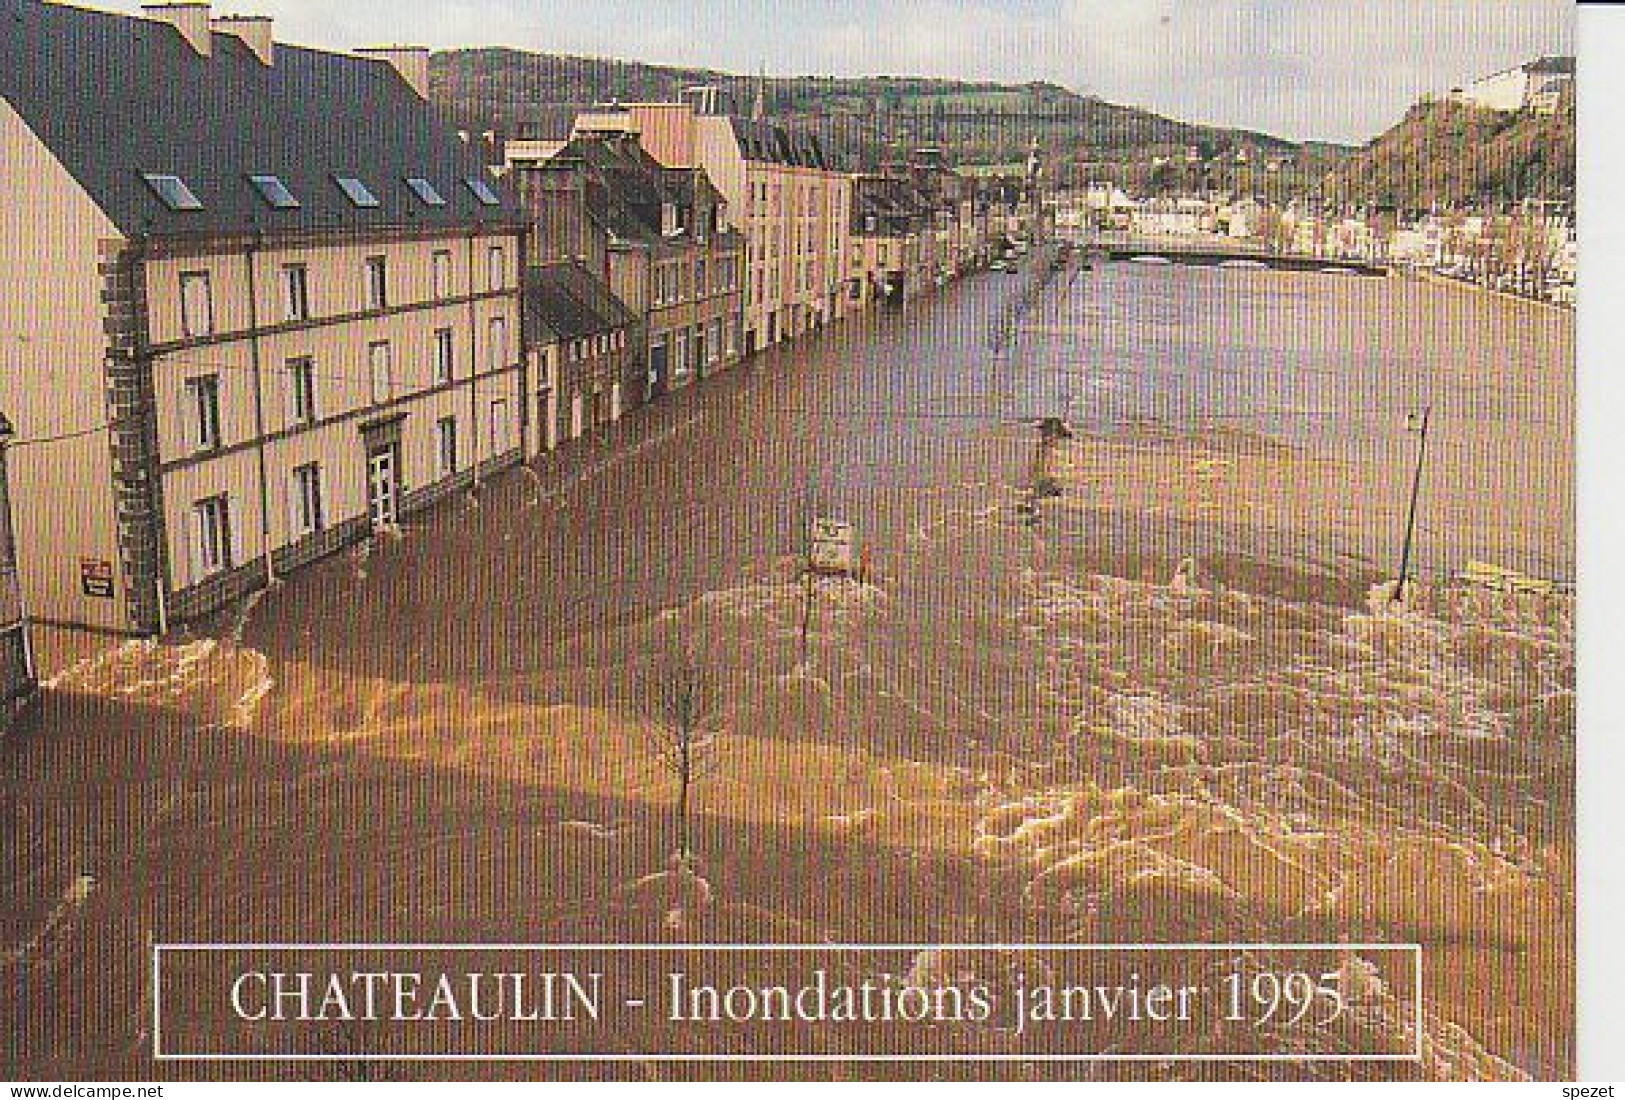 CHATEAULIN : Inondations Janvier 1995 - Châteaulin